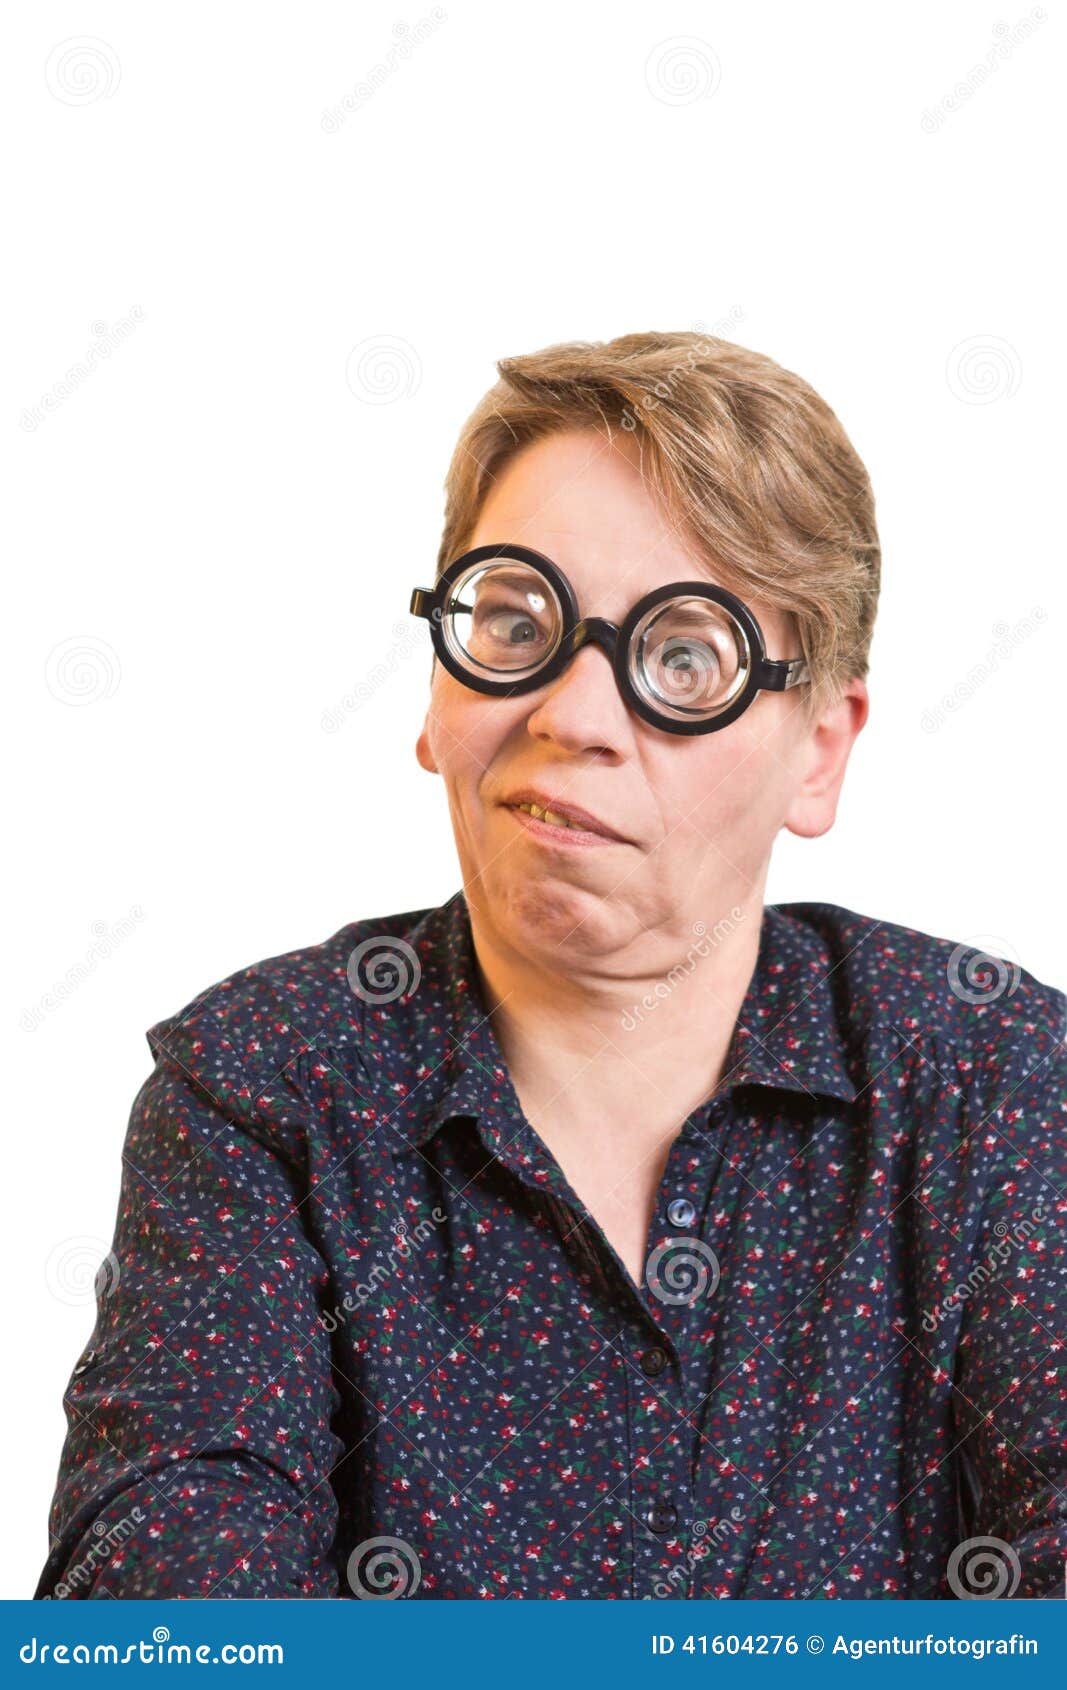 Grimacing Woman Thick Glasses Stock Photo - Image: 41604276 People With Thick Glasses